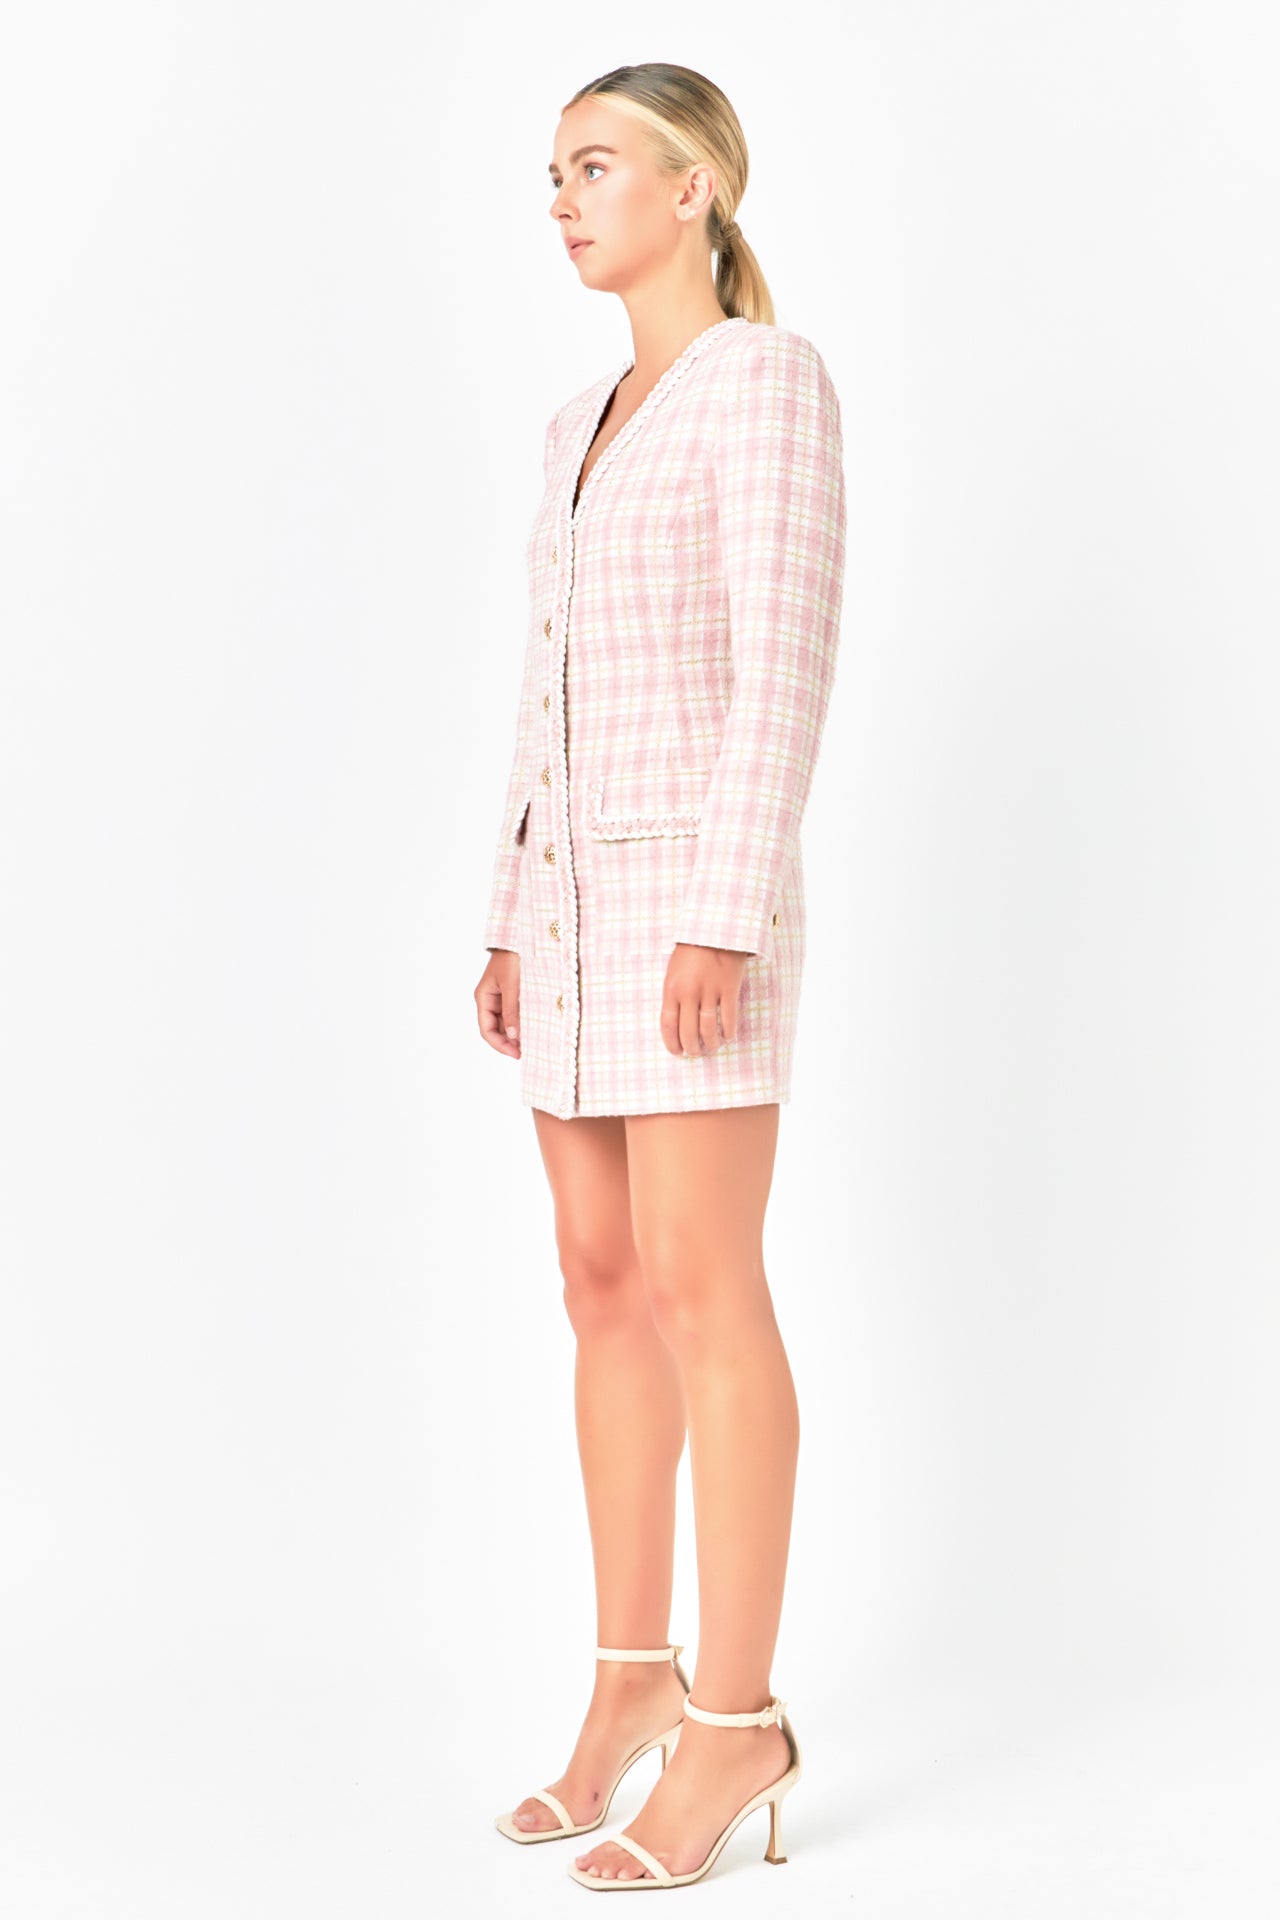 ENDLESS ROSE - Premium Long Sleeve Tweed Mini Dress - DRESSES available at Objectrare